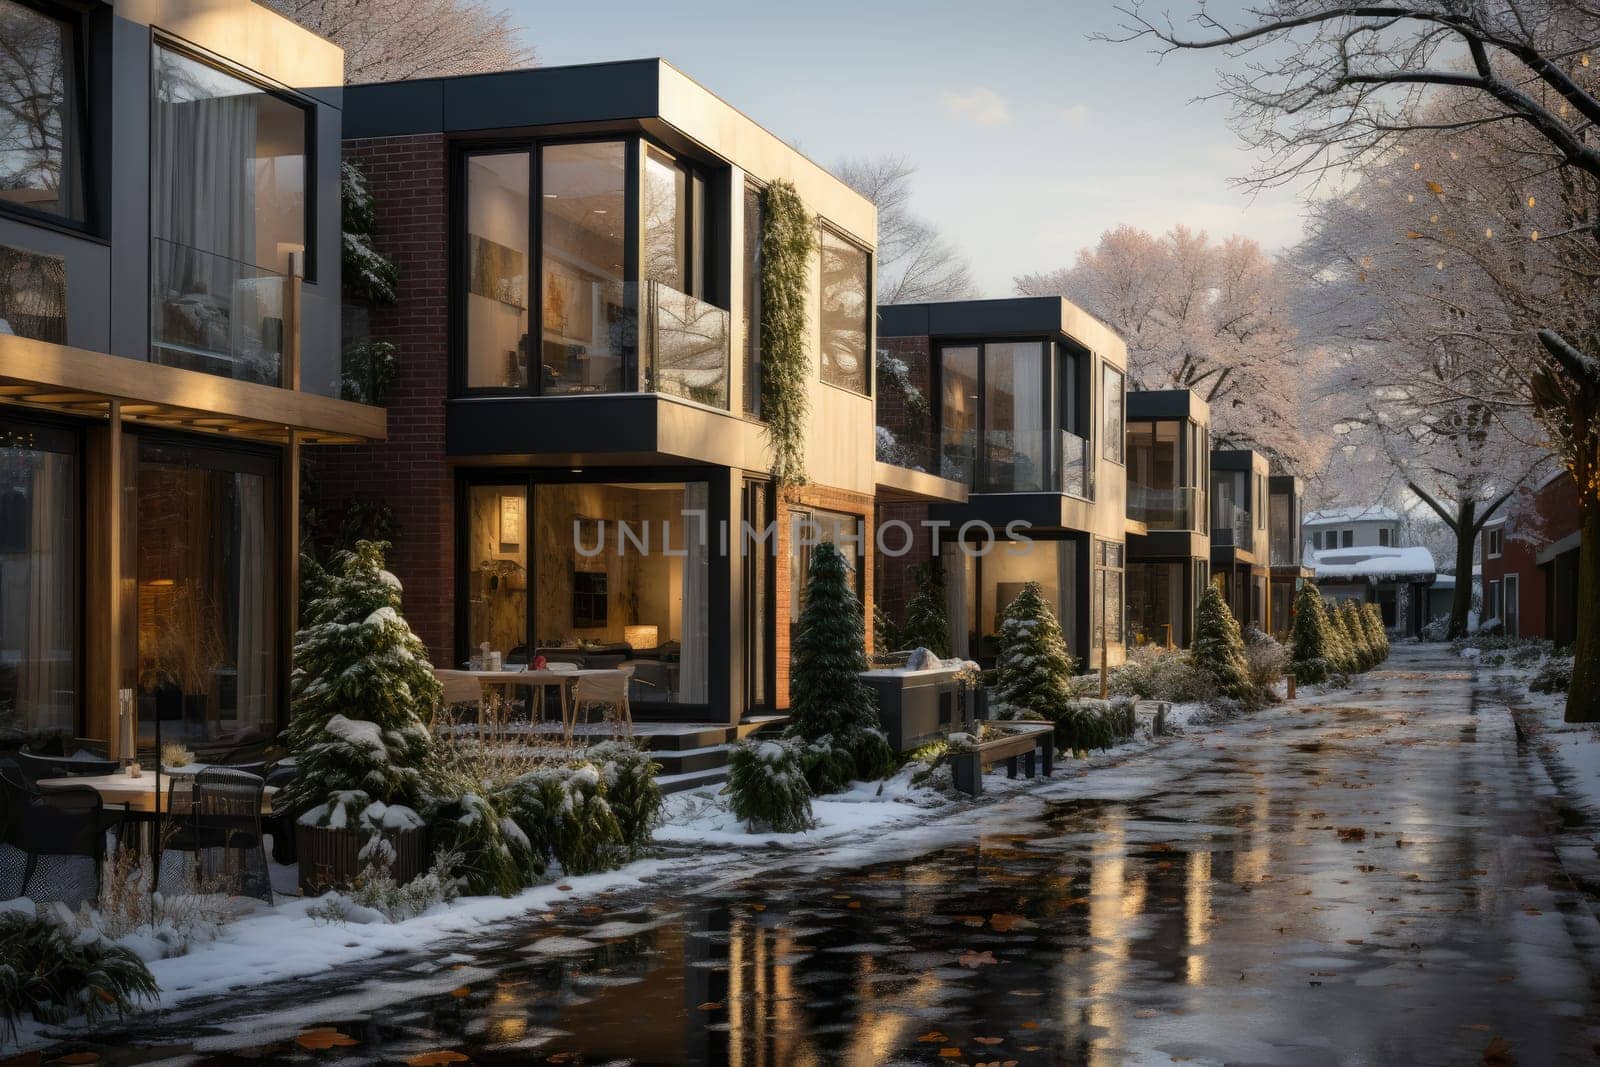 An elegant townhouse made of brick and steel, surrounded by the coziness of a winter Christmas, exudes its unique magic